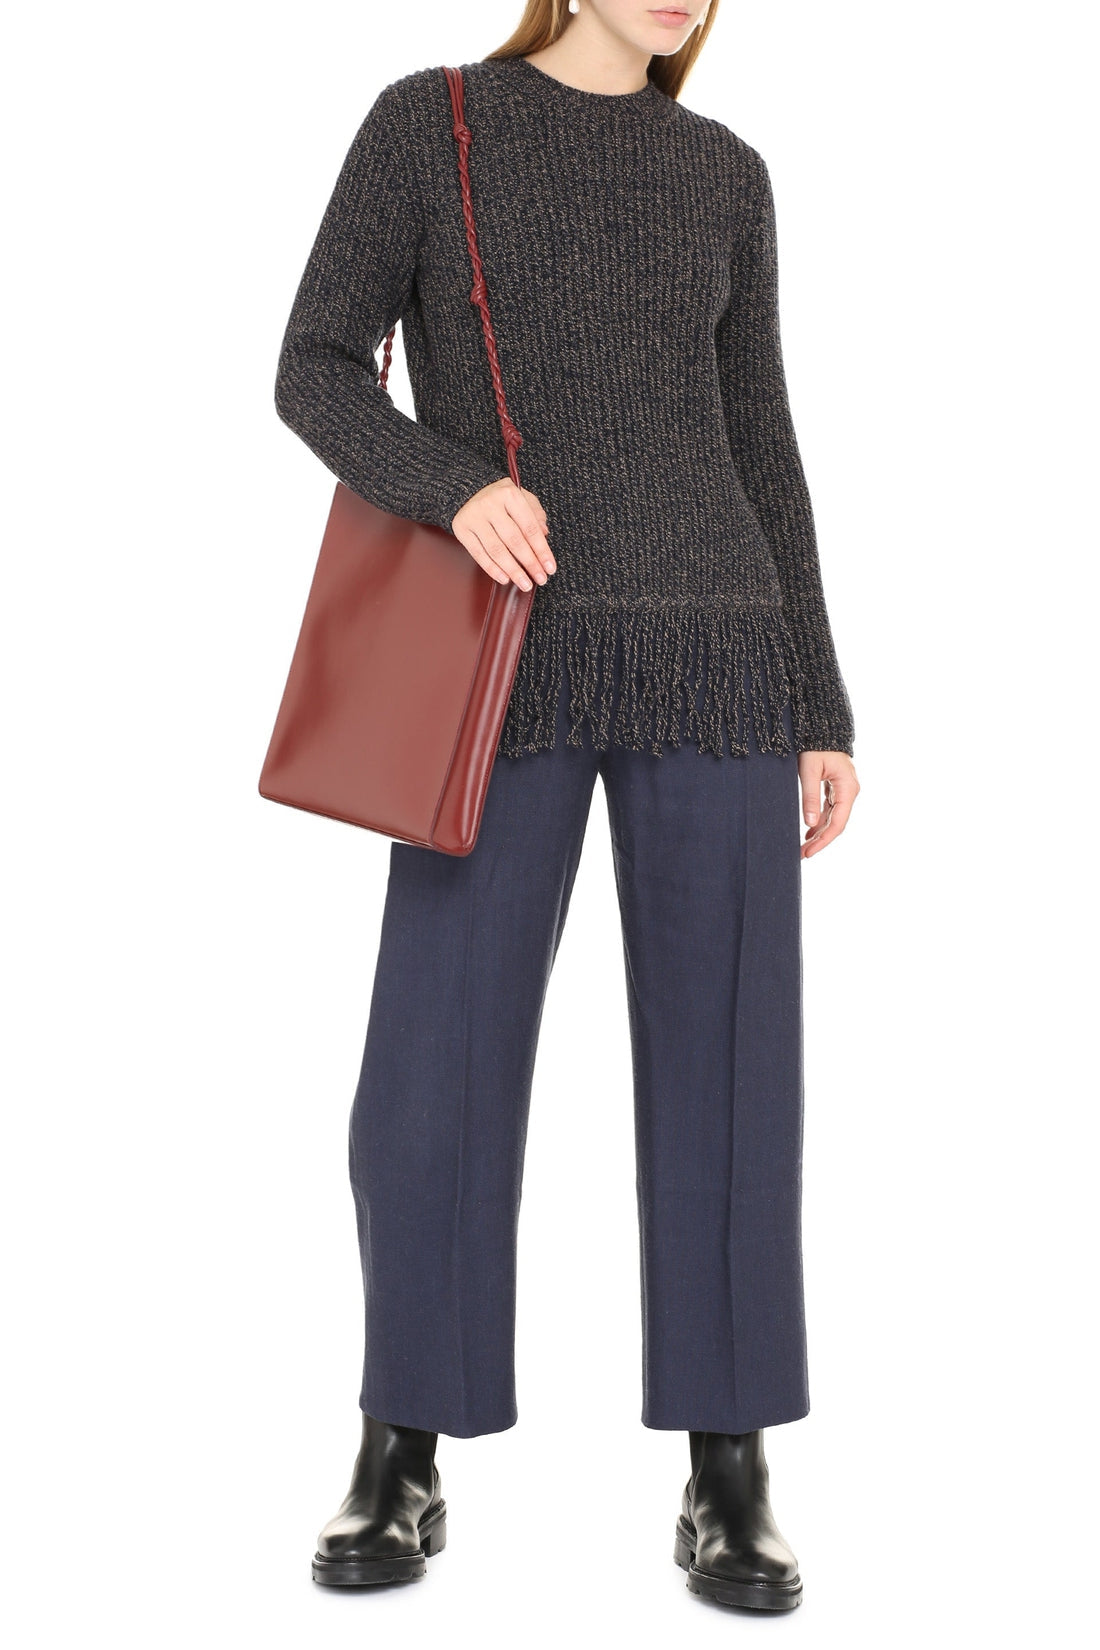 Max Mara-OUTLET-SALE-Femme ribbed sweater with fringes-ARCHIVIST